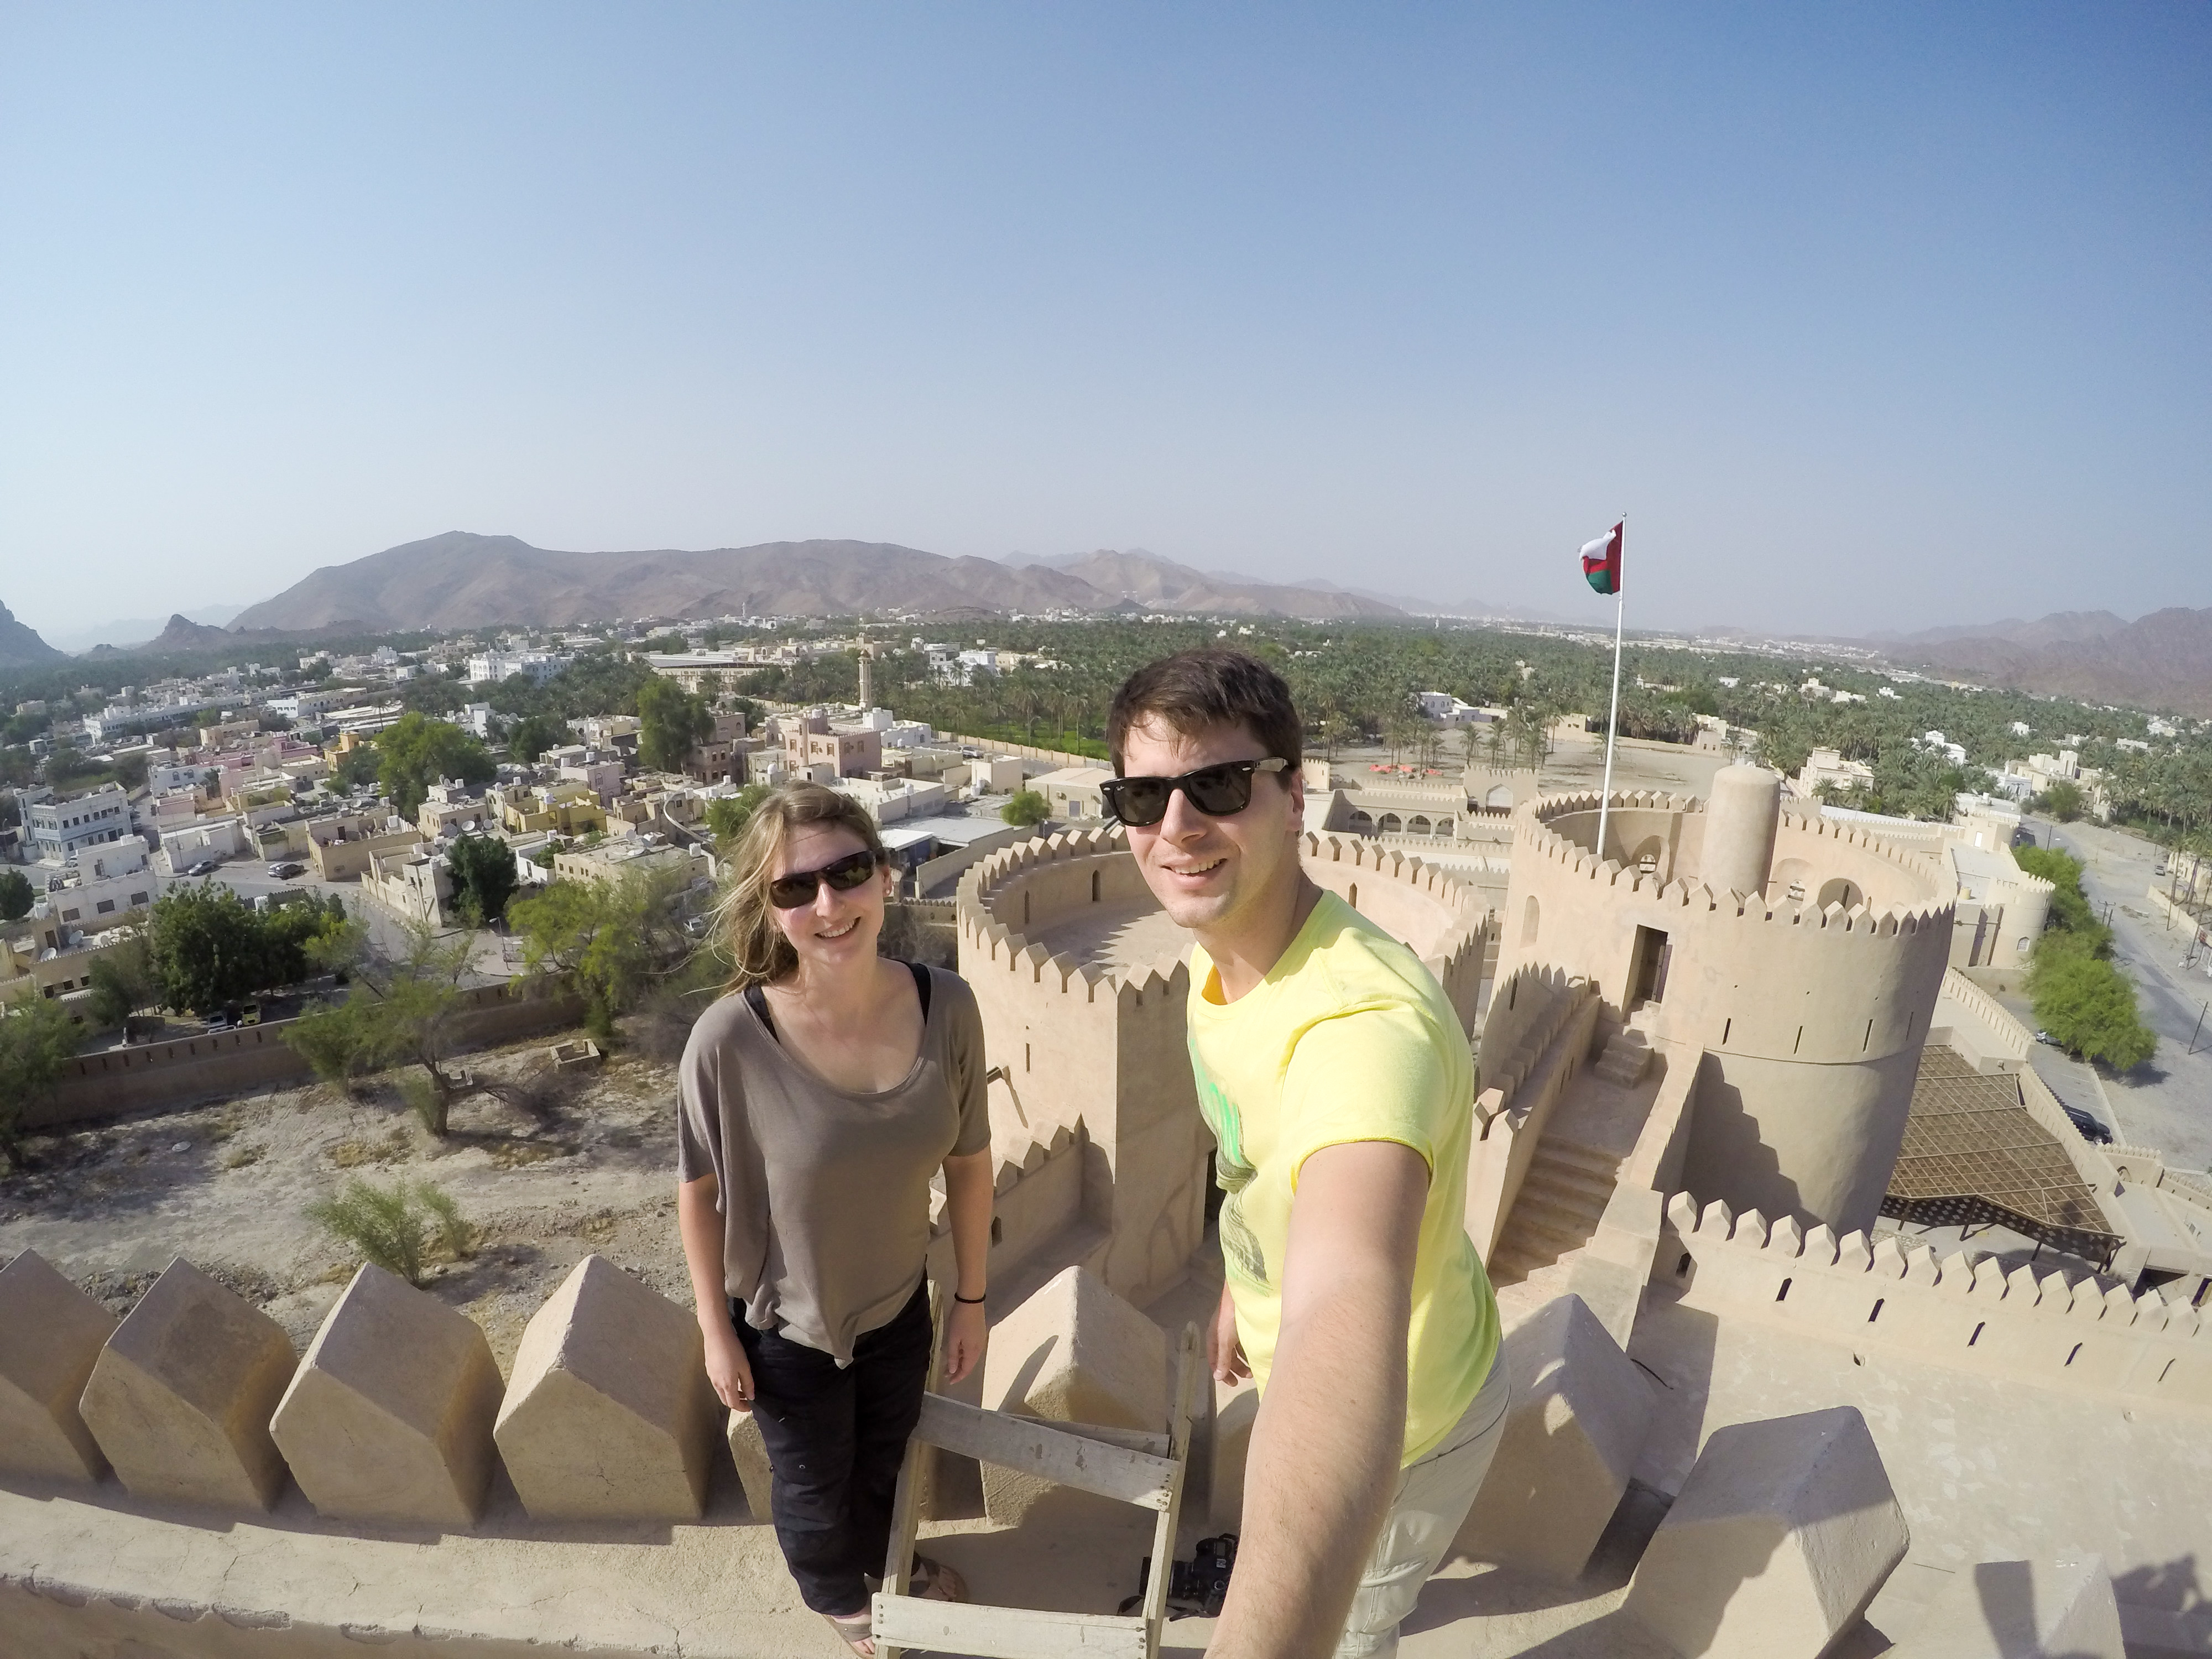 At the edge of the Rustaq fort.